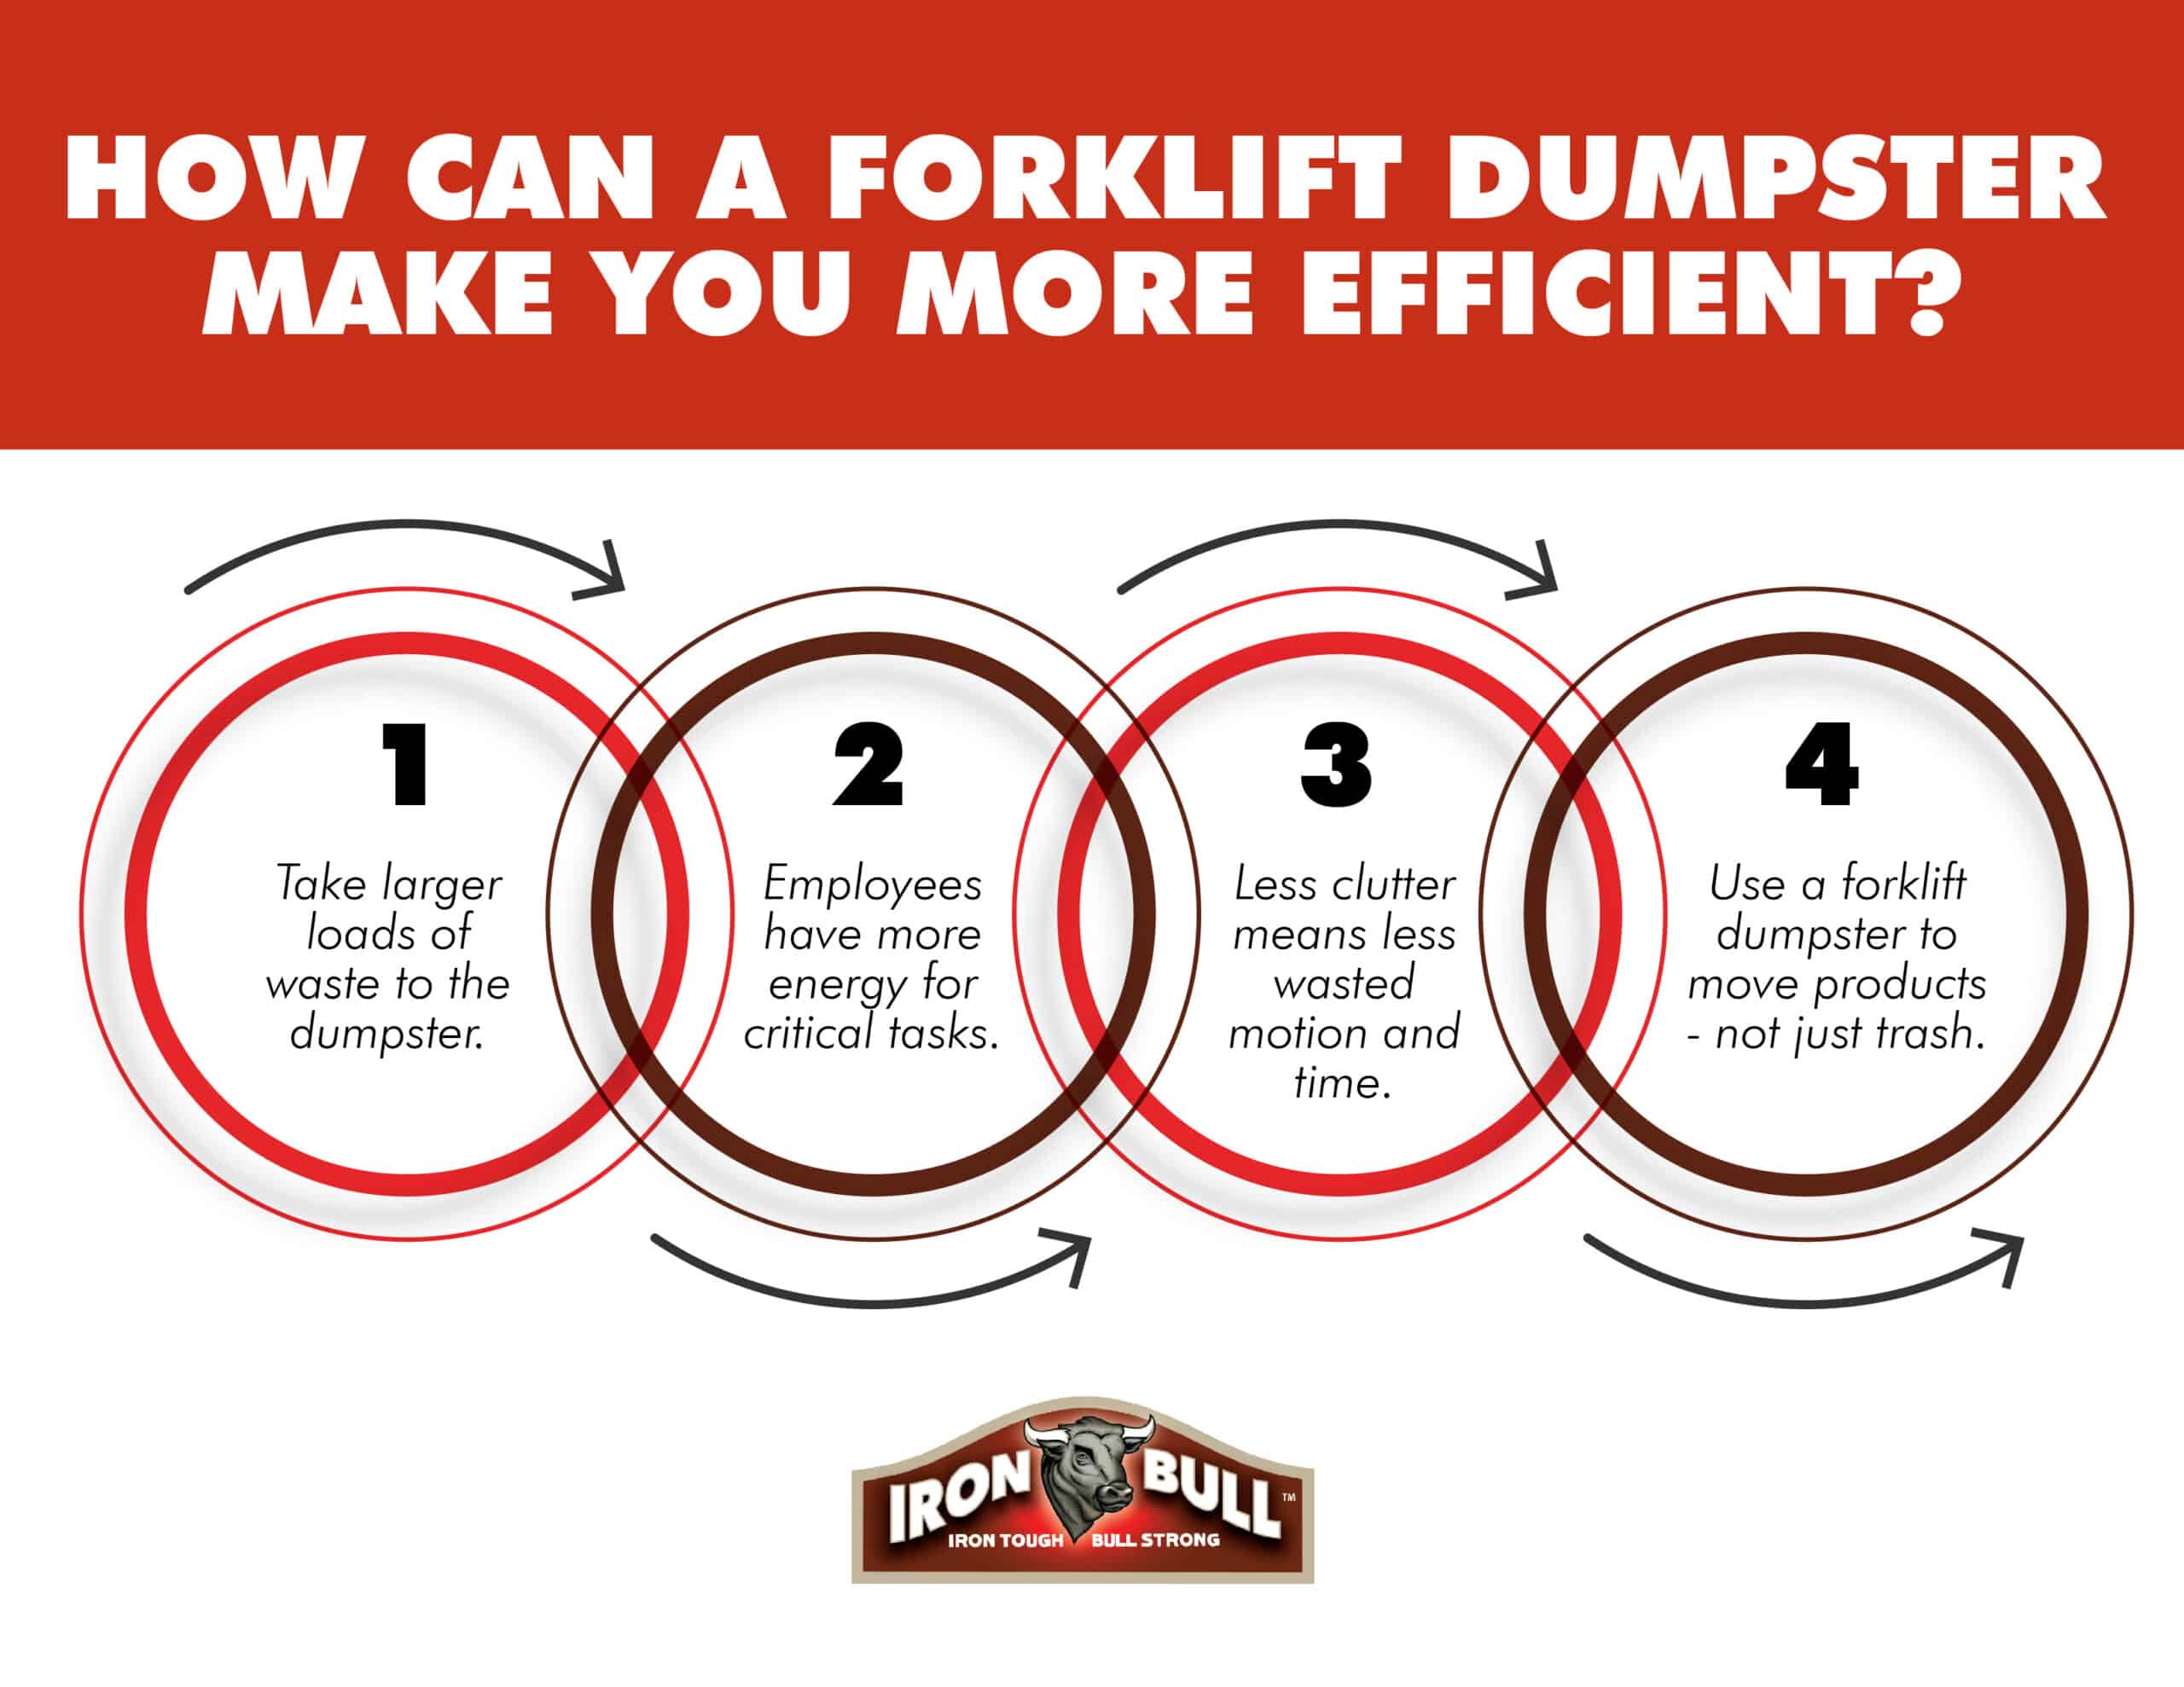 how can a forklift dumpster make you more efficient